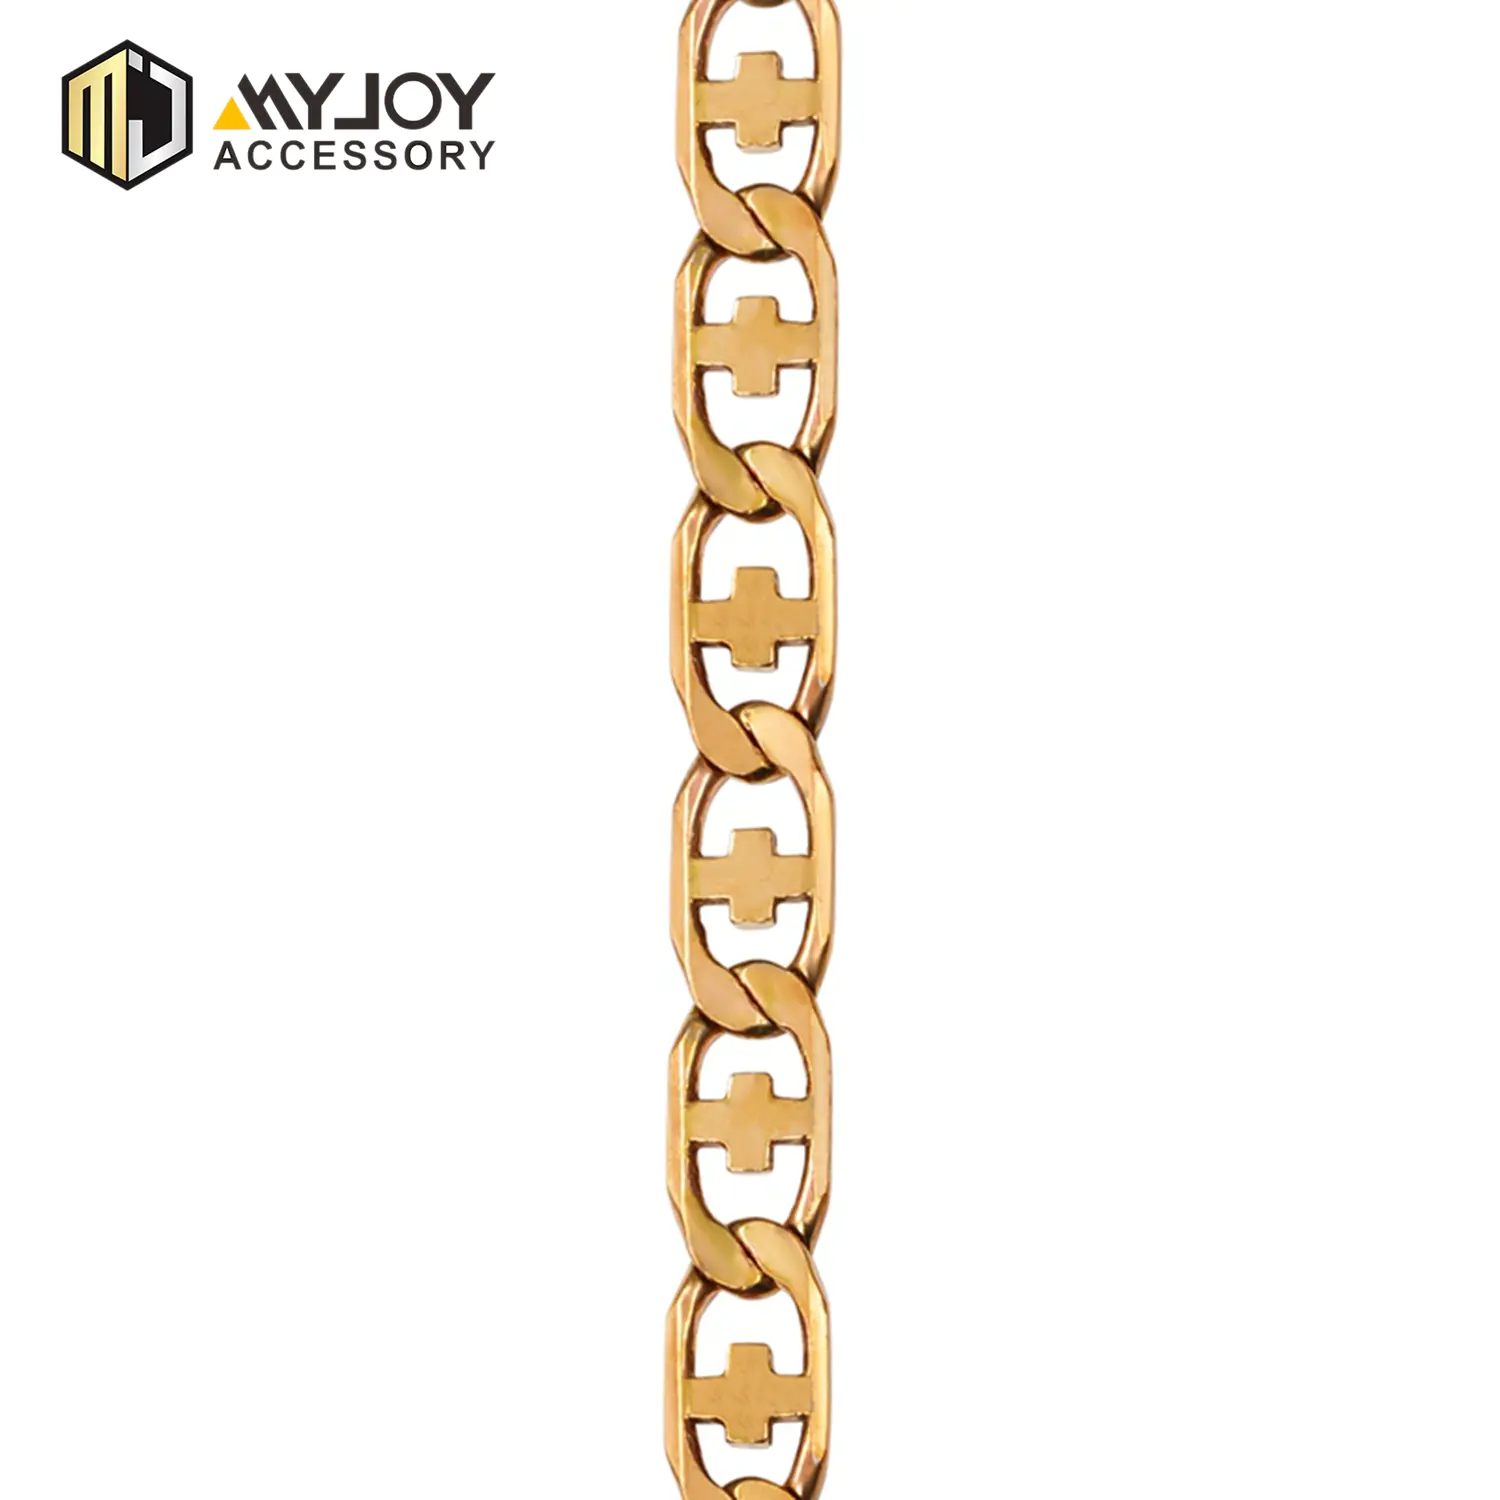 MYJOY chains purse chain for business for purses